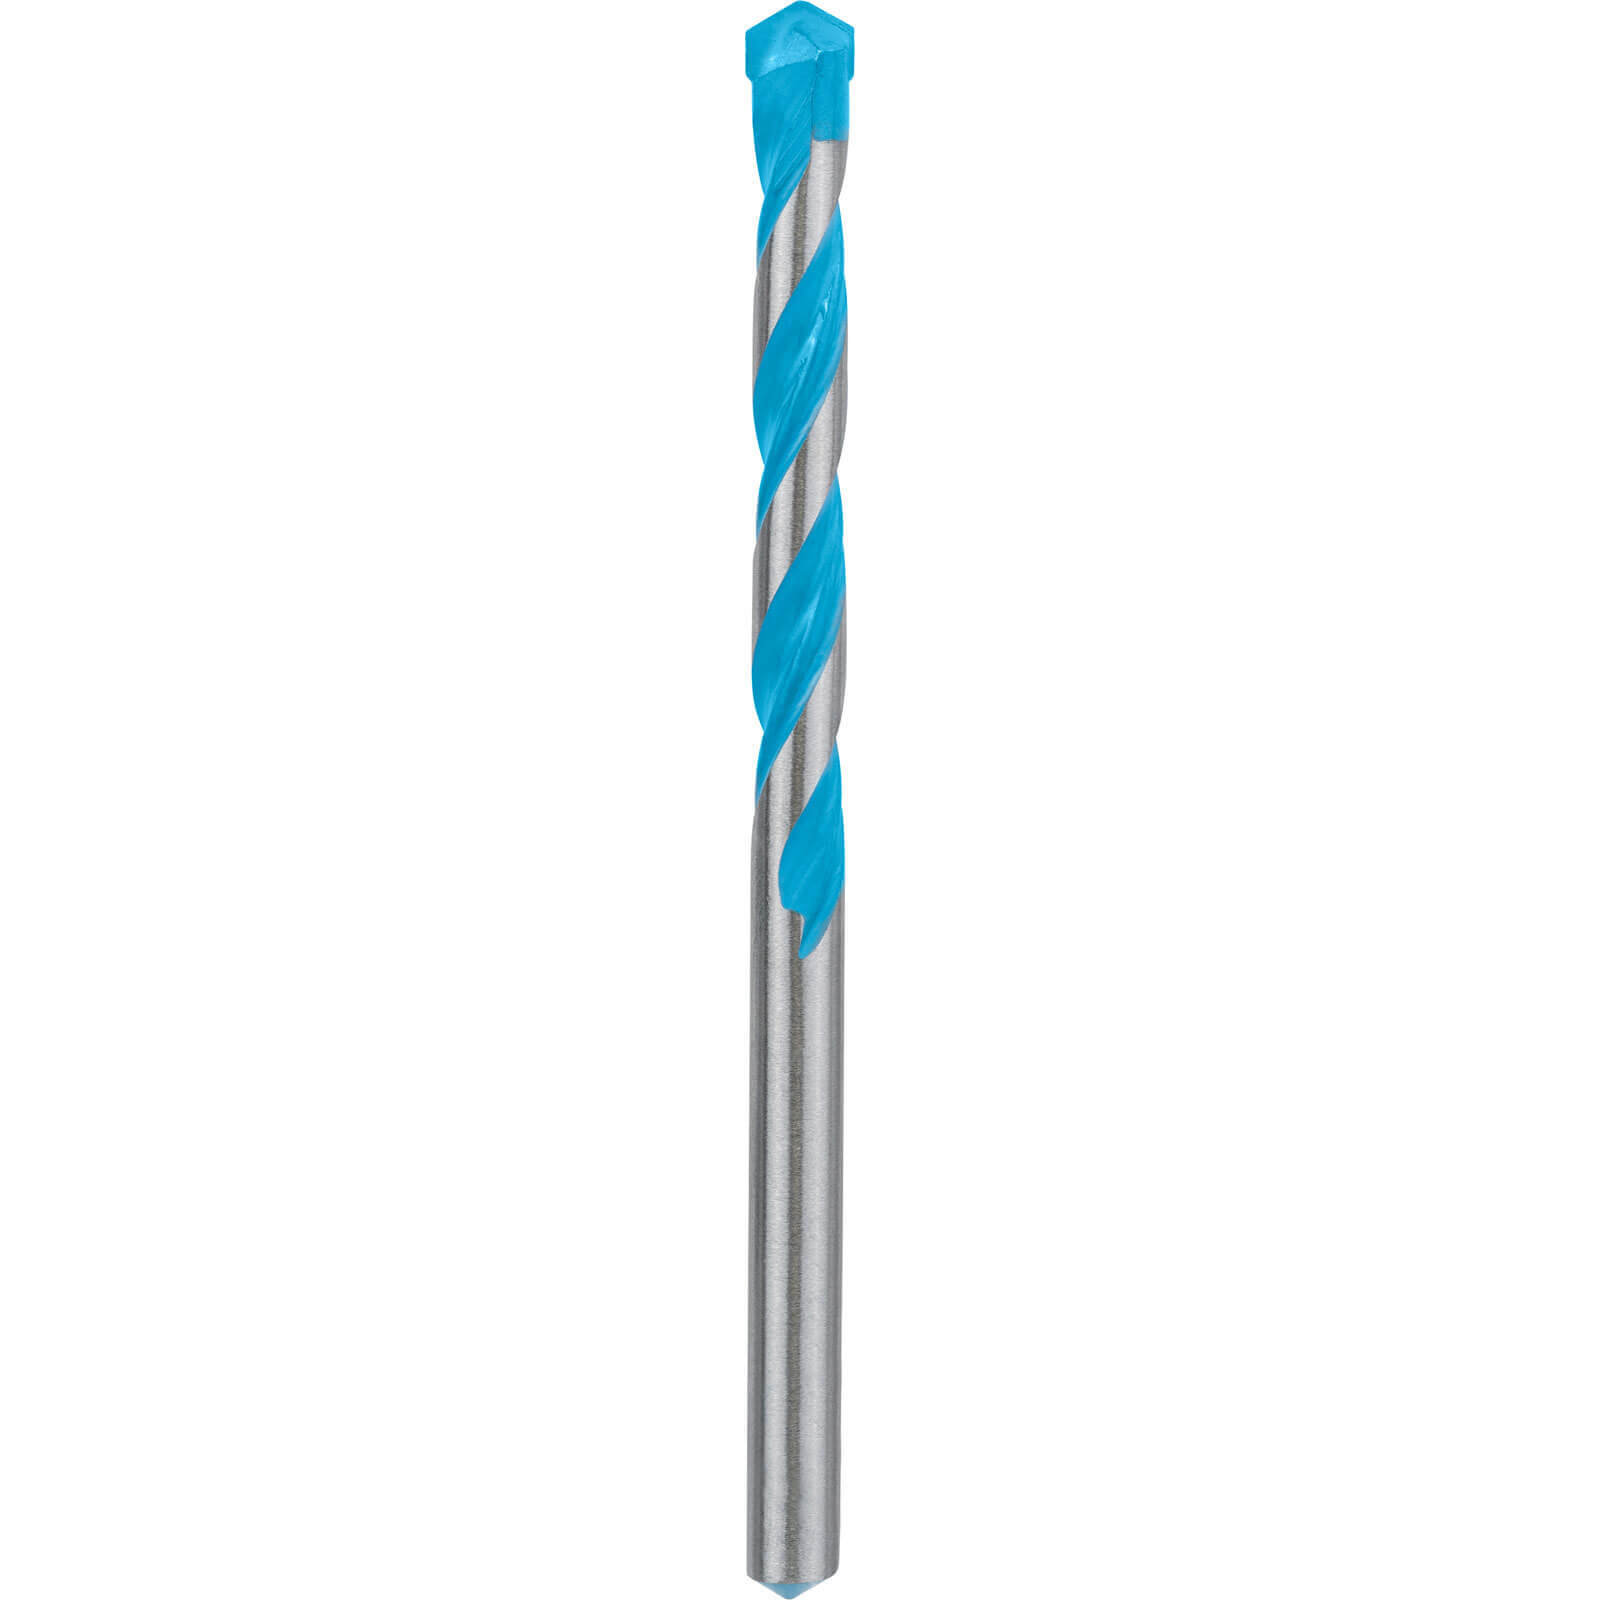 Image of Bosch Expert CYL-9 Multi Construction Drill Bit 8mm 120mm Pack of 1